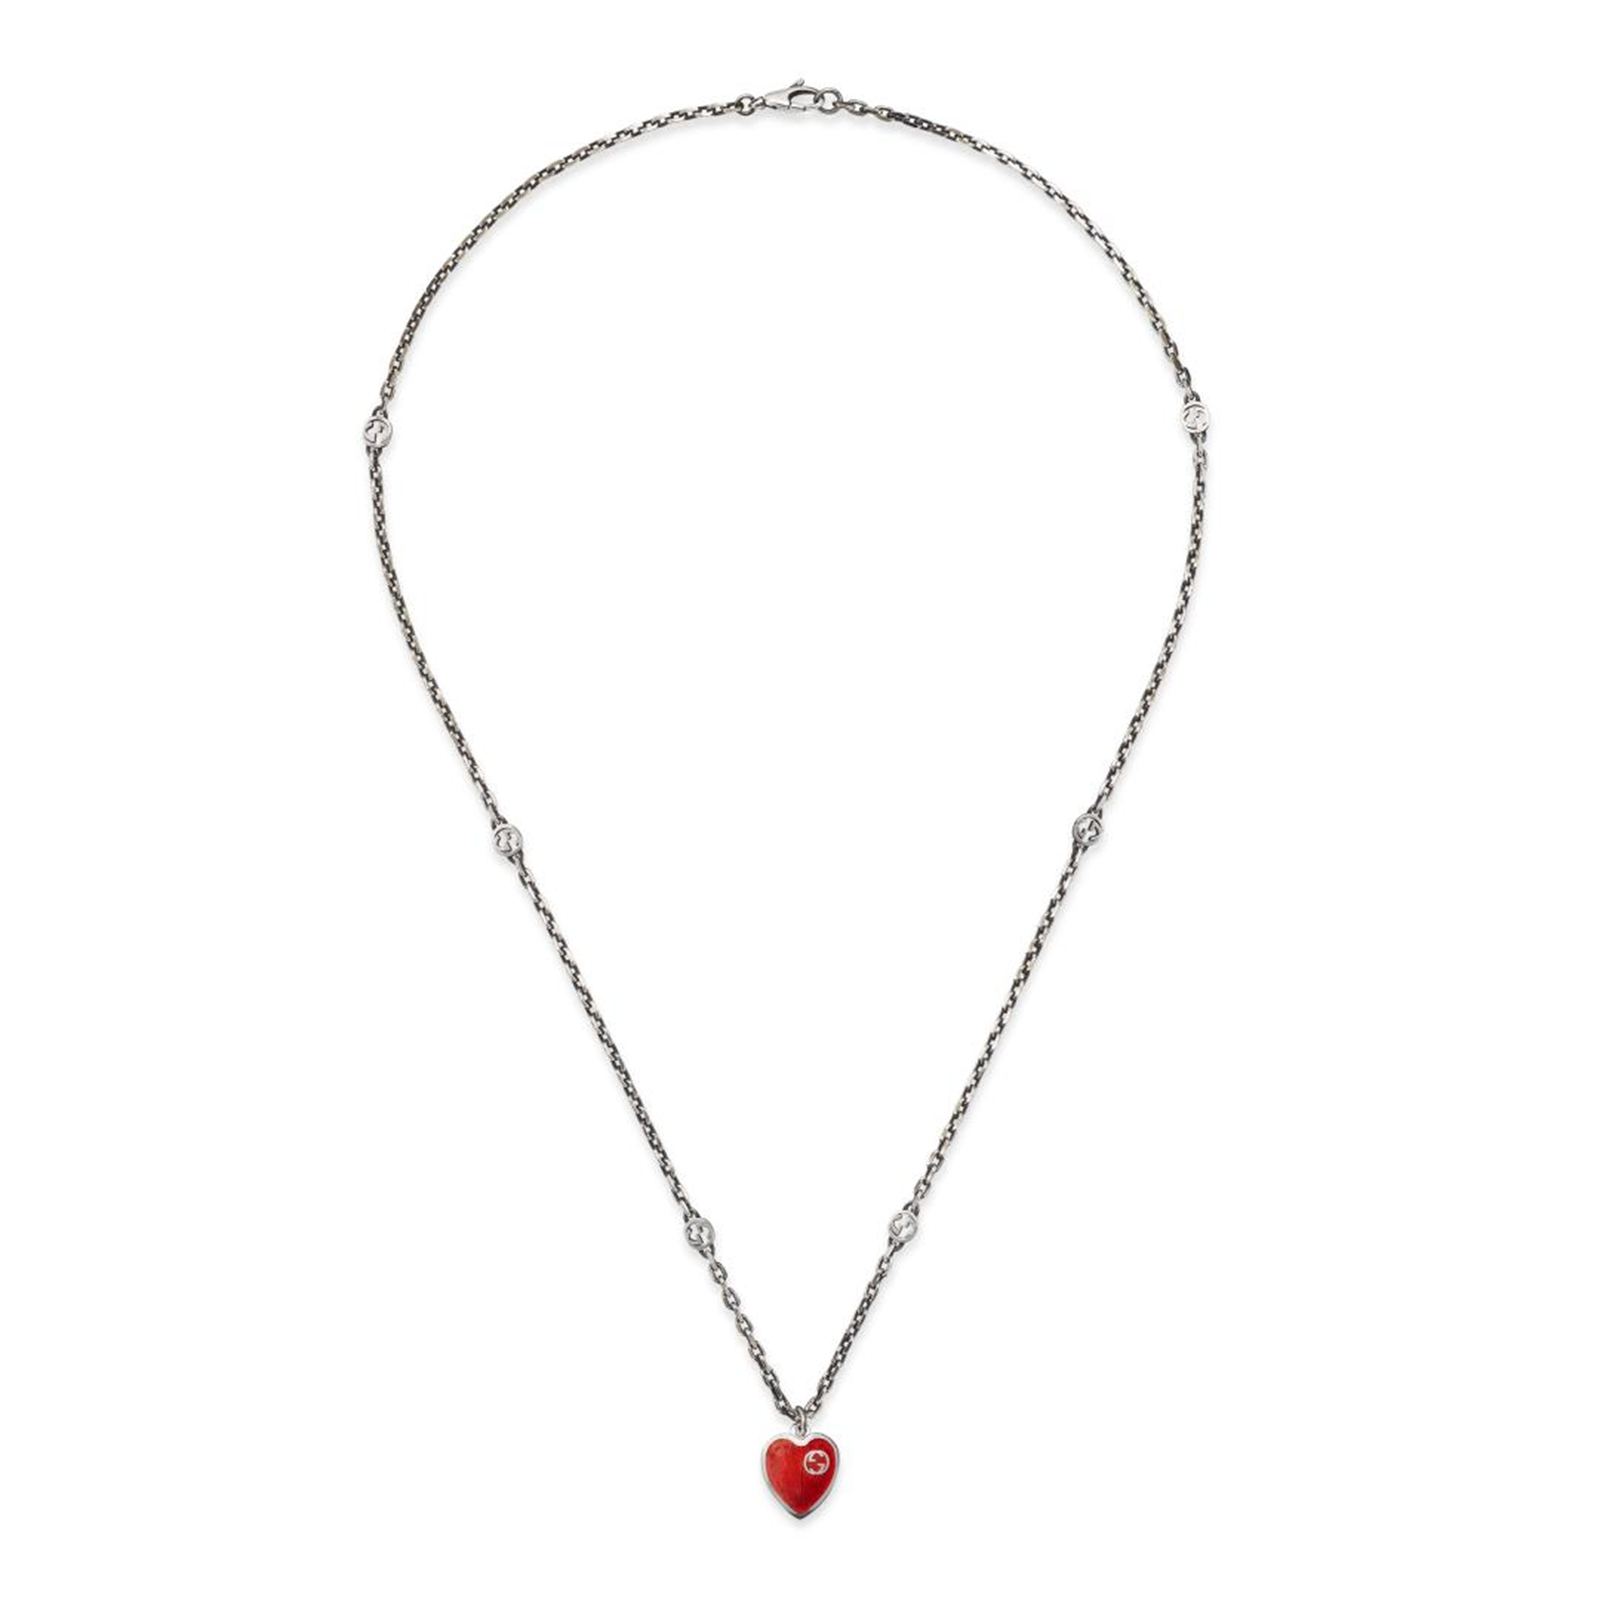 Exclusive Gucci Heart Aged Finish Sterling Silver & Red Enamel Pendant ...